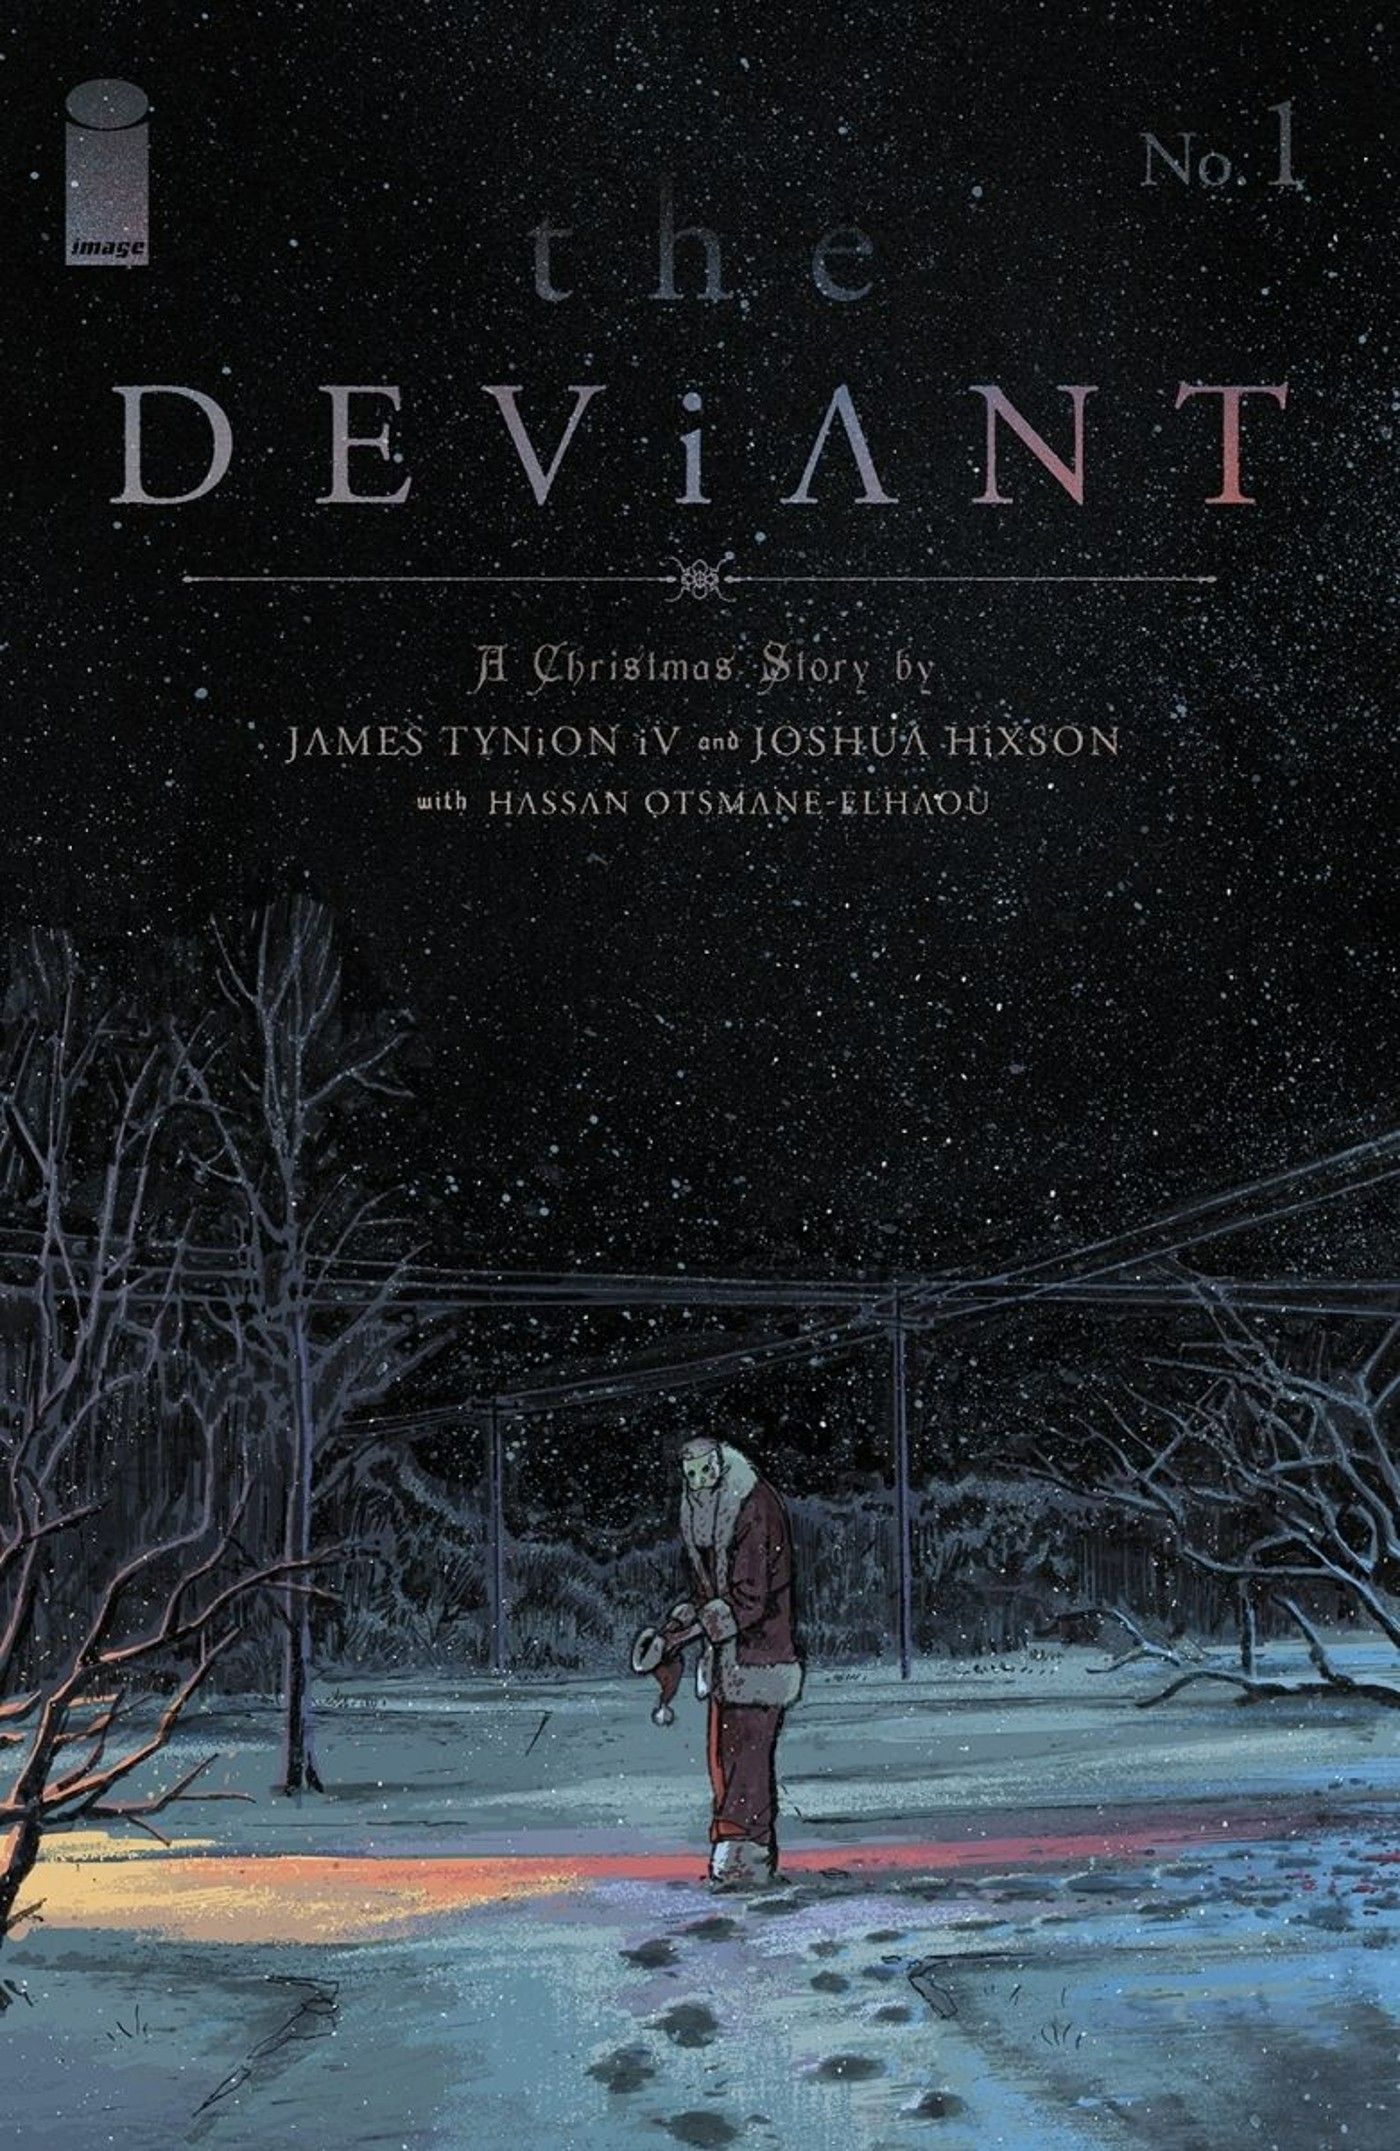 “He Sees You When You’re Sleeping”: Santa Goes Evil In THE DEVIANT